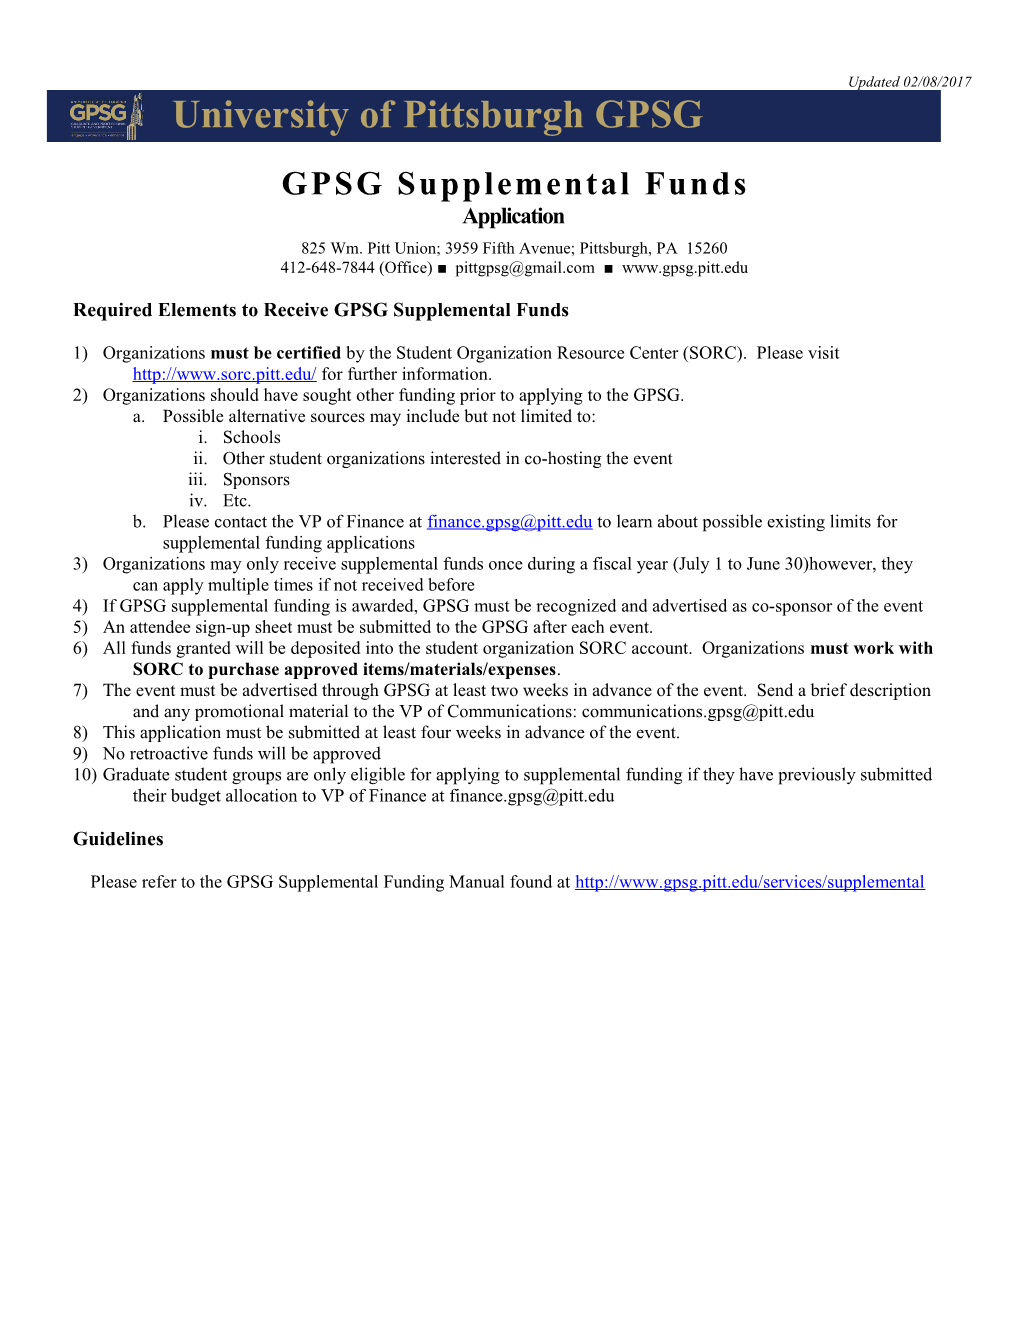 Required Elements to Receive Gpsgsupplemental Funds